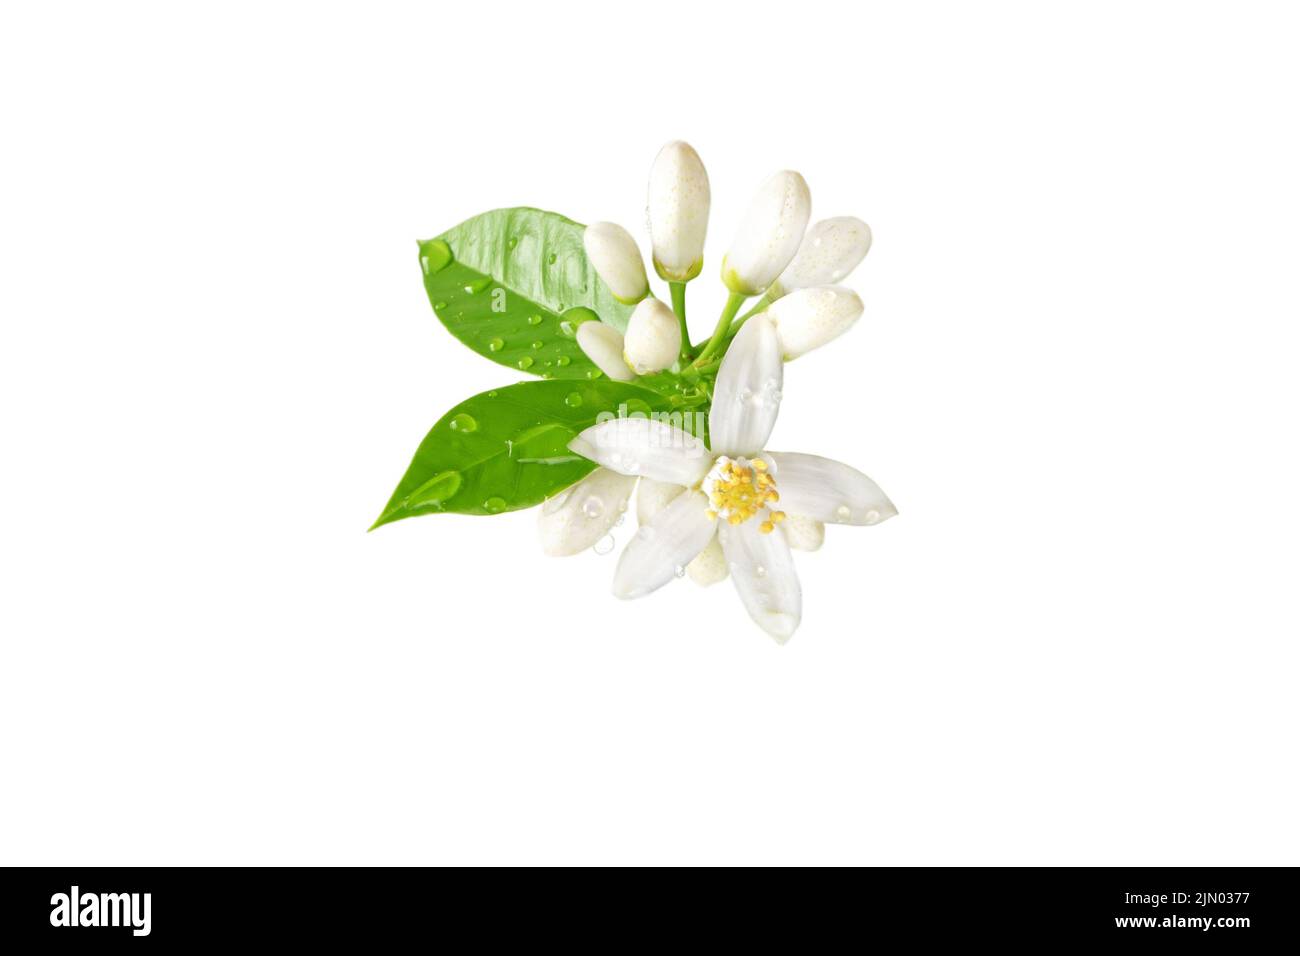 Orange tree bunch with white flowers, buds and leaves and water drops isolated on white. Neroli blossom. Citrus bloom. Stock Photo